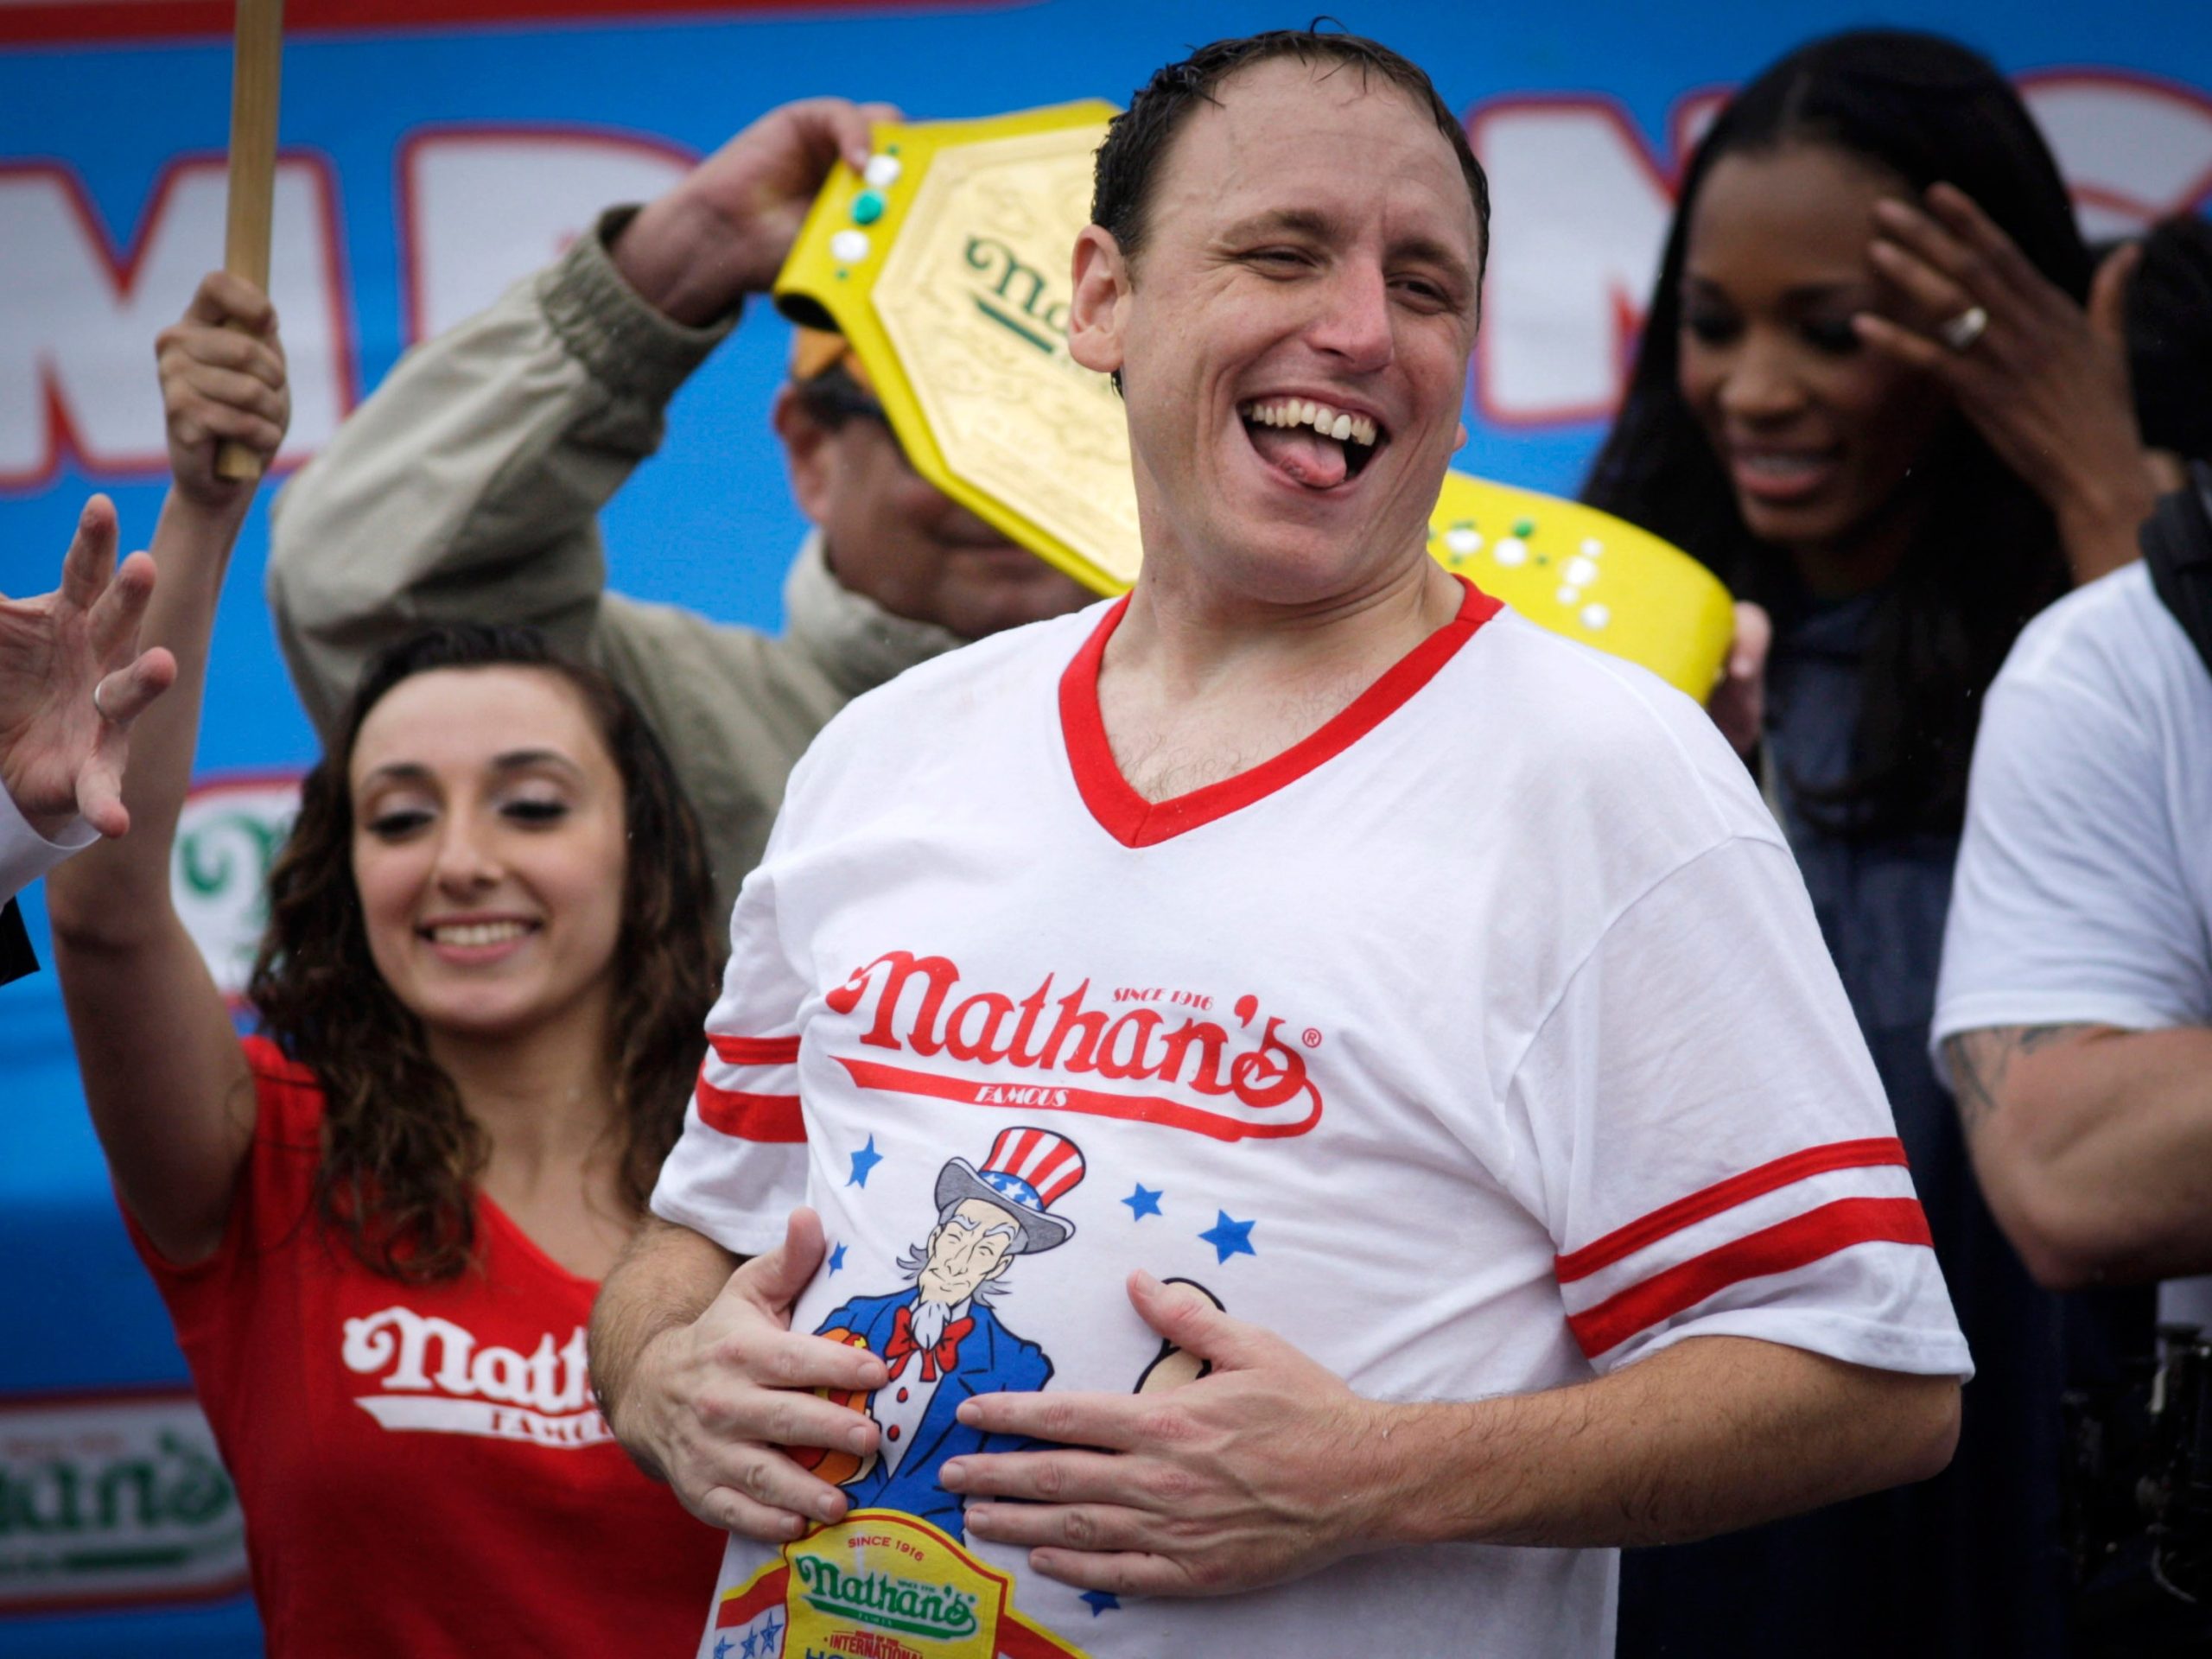 Joey Chestnut Sets Record with 16 Consecutive Wins at Nathan's Hot Dog Eating Contest (3)